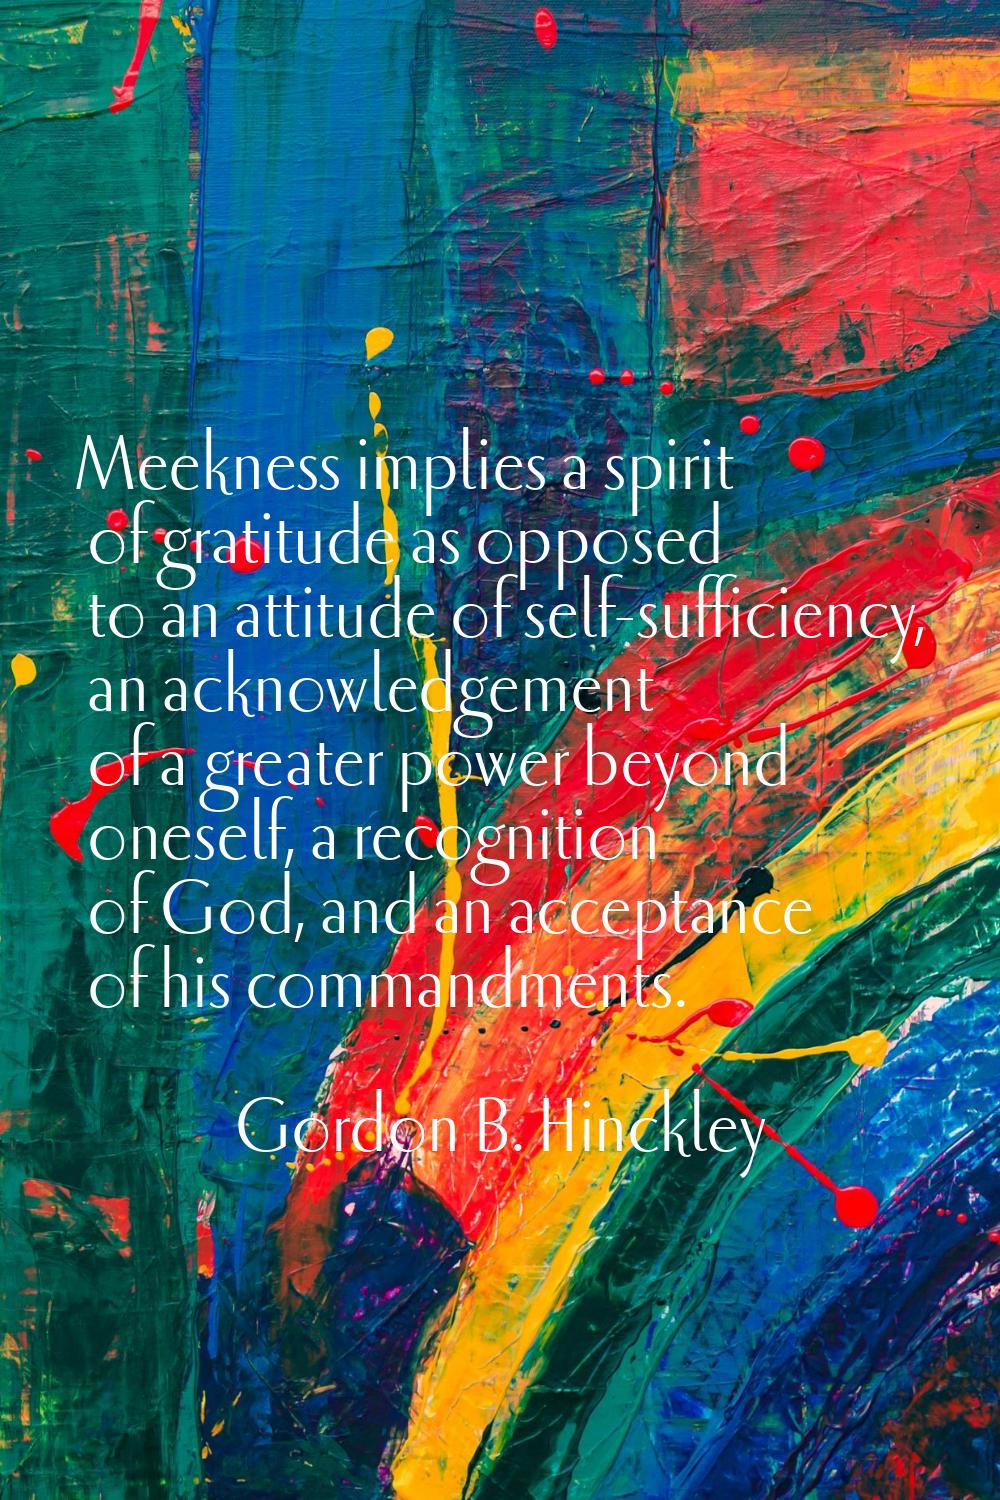 Meekness implies a spirit of gratitude as opposed to an attitude of self-sufficiency, an acknowledg